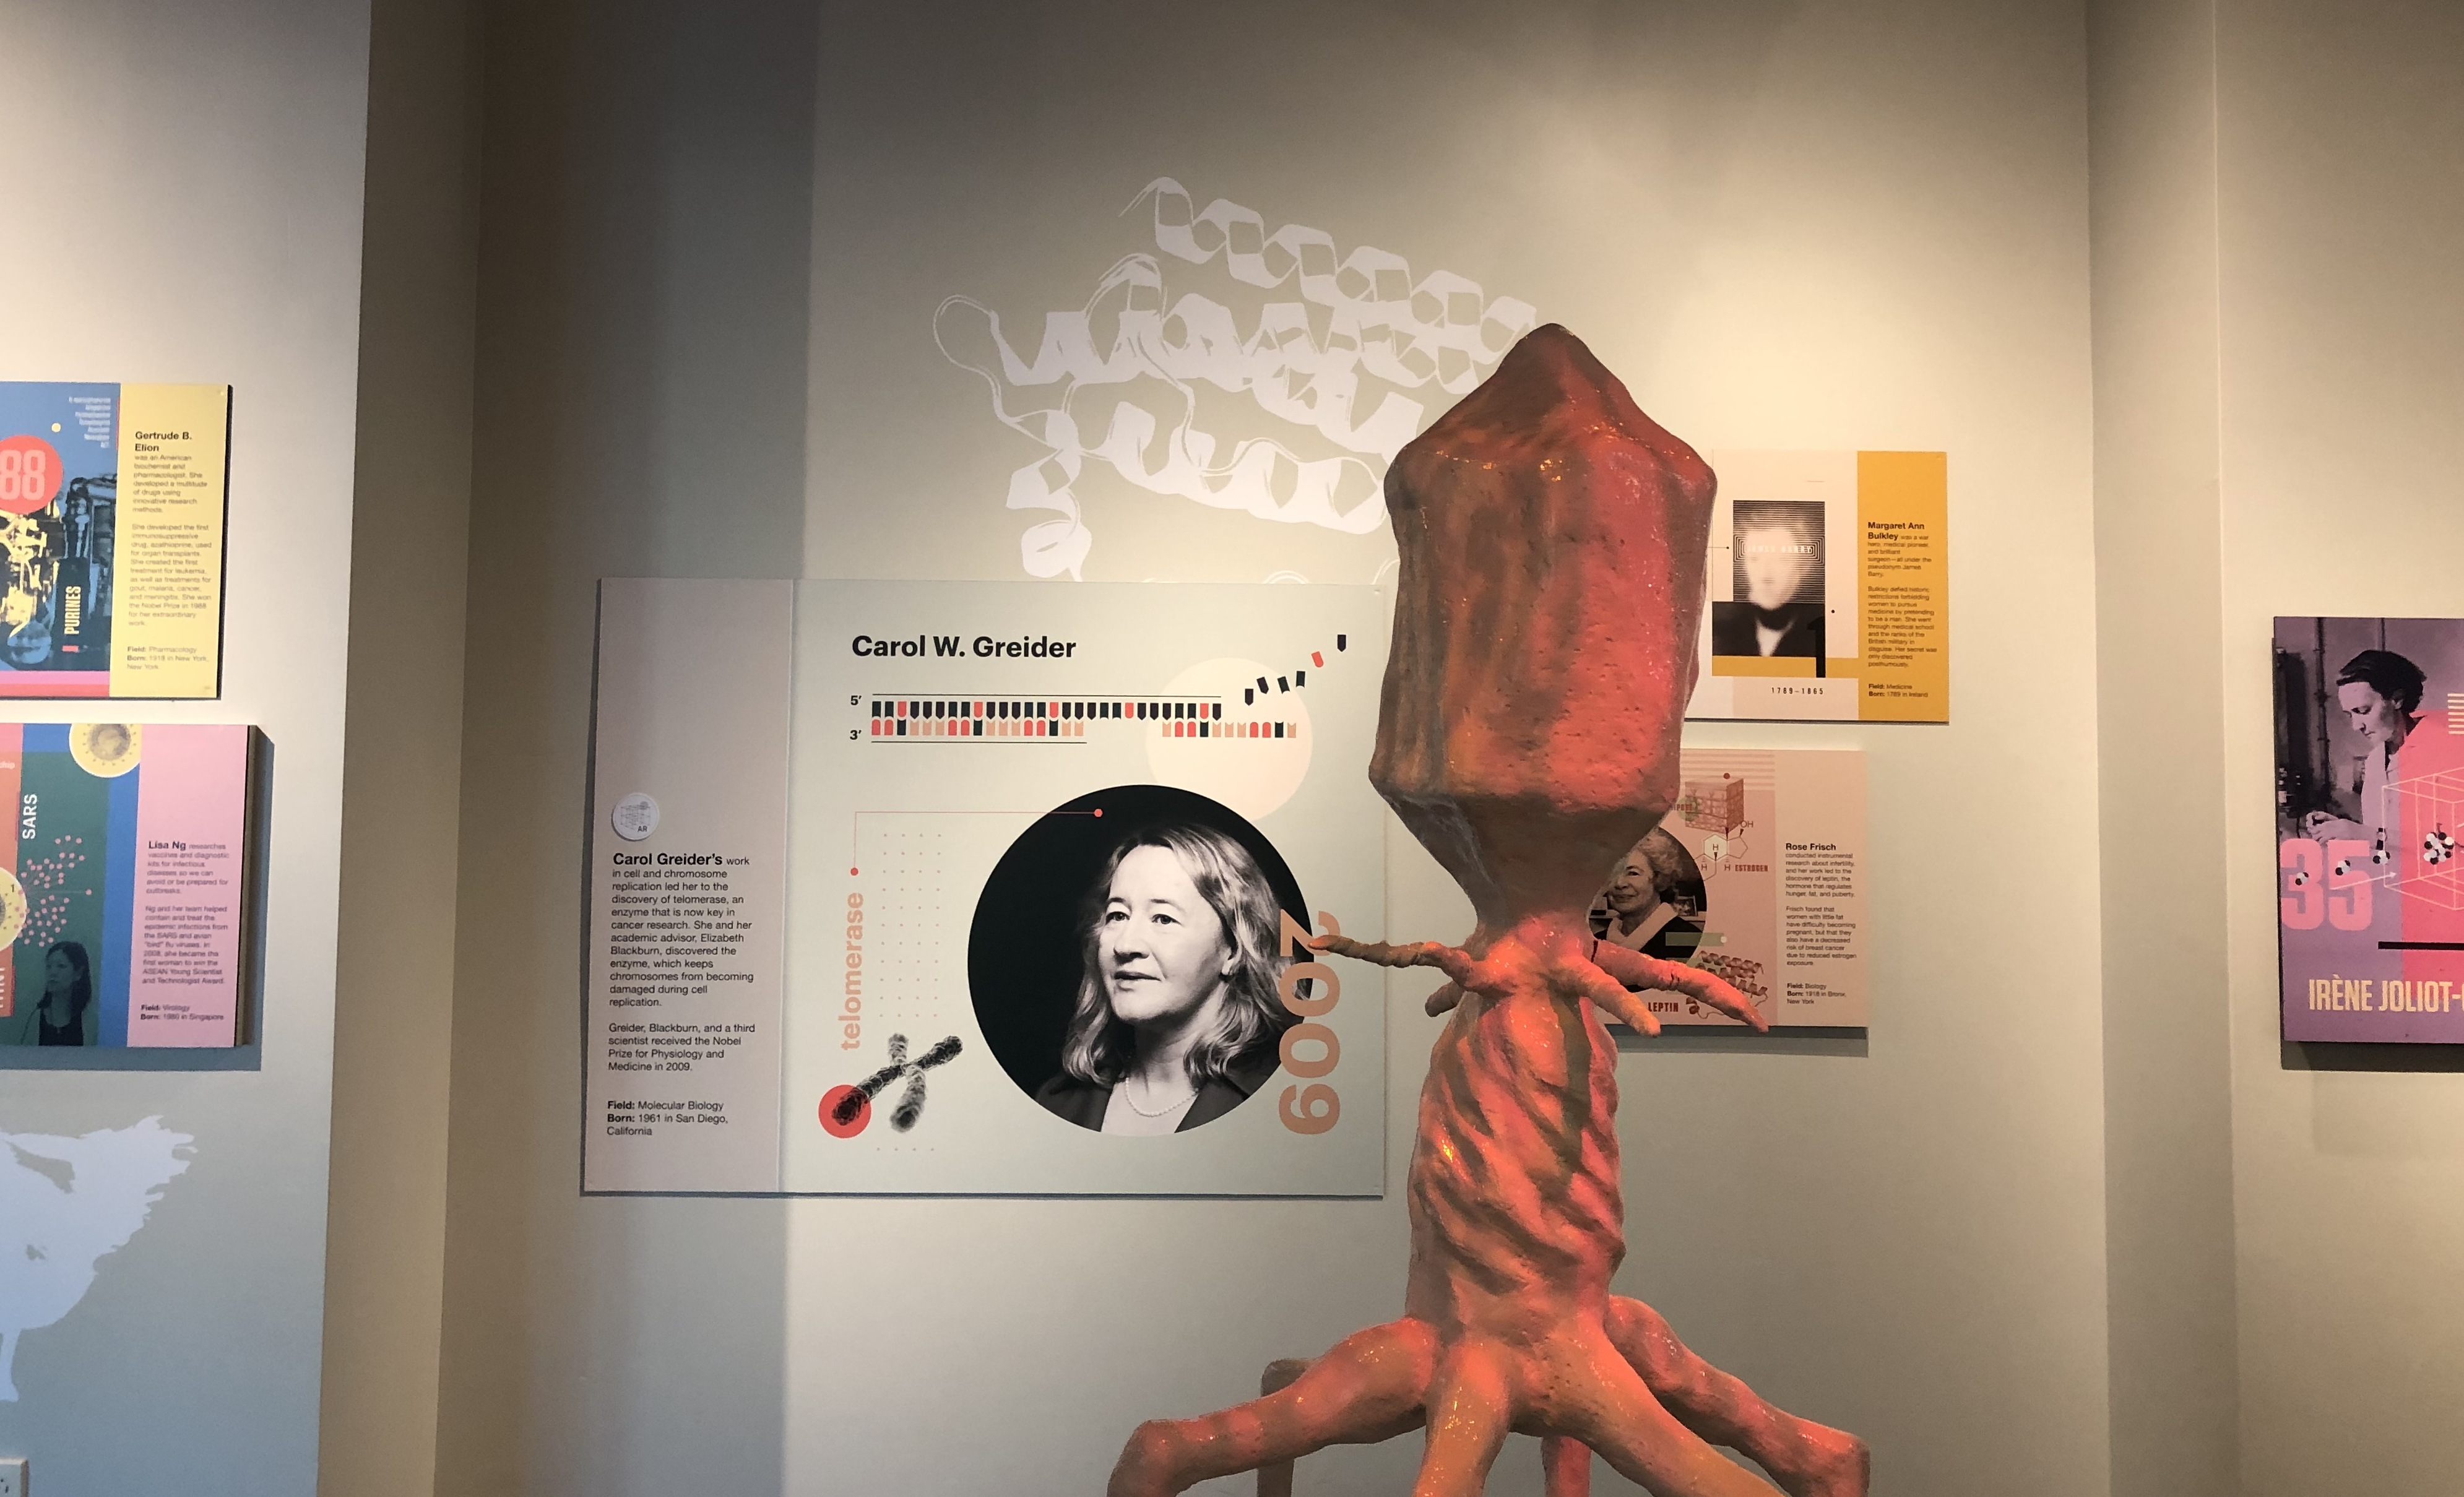 Figure 1. Beyond Curie exhibition at the North Carolina Museum of Natural Sciences(NCNMS), 2019. Photo by the author.